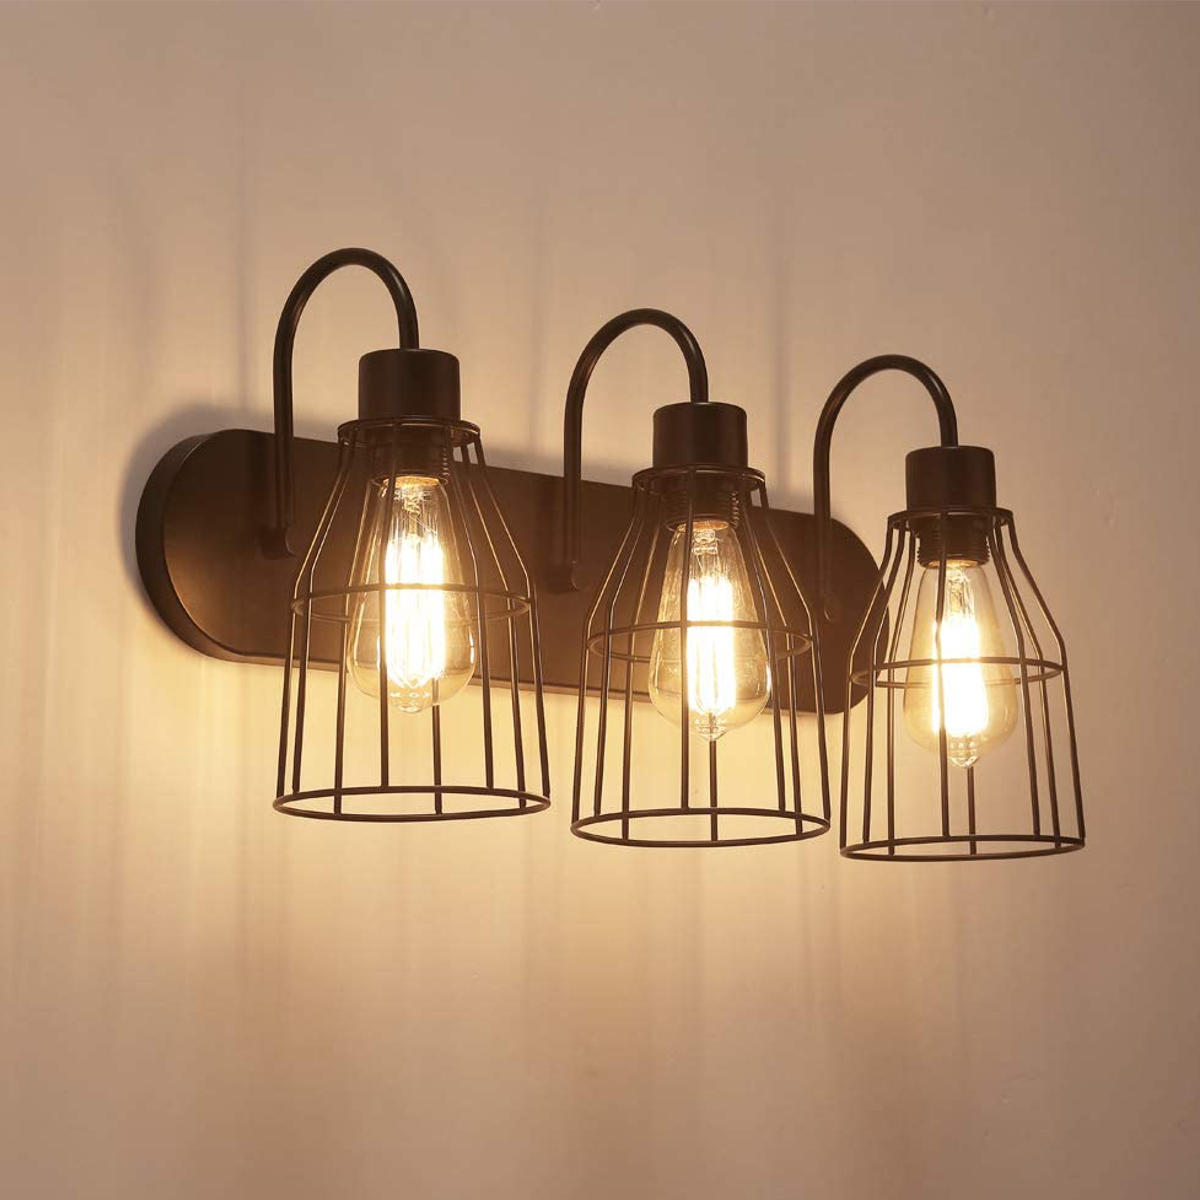 3-Lamp-Industrial-Barn-Wall-Mount-Lamp-Retro-Metal-Sconce-Light-Fixture-Without-Bulb-1745470-8